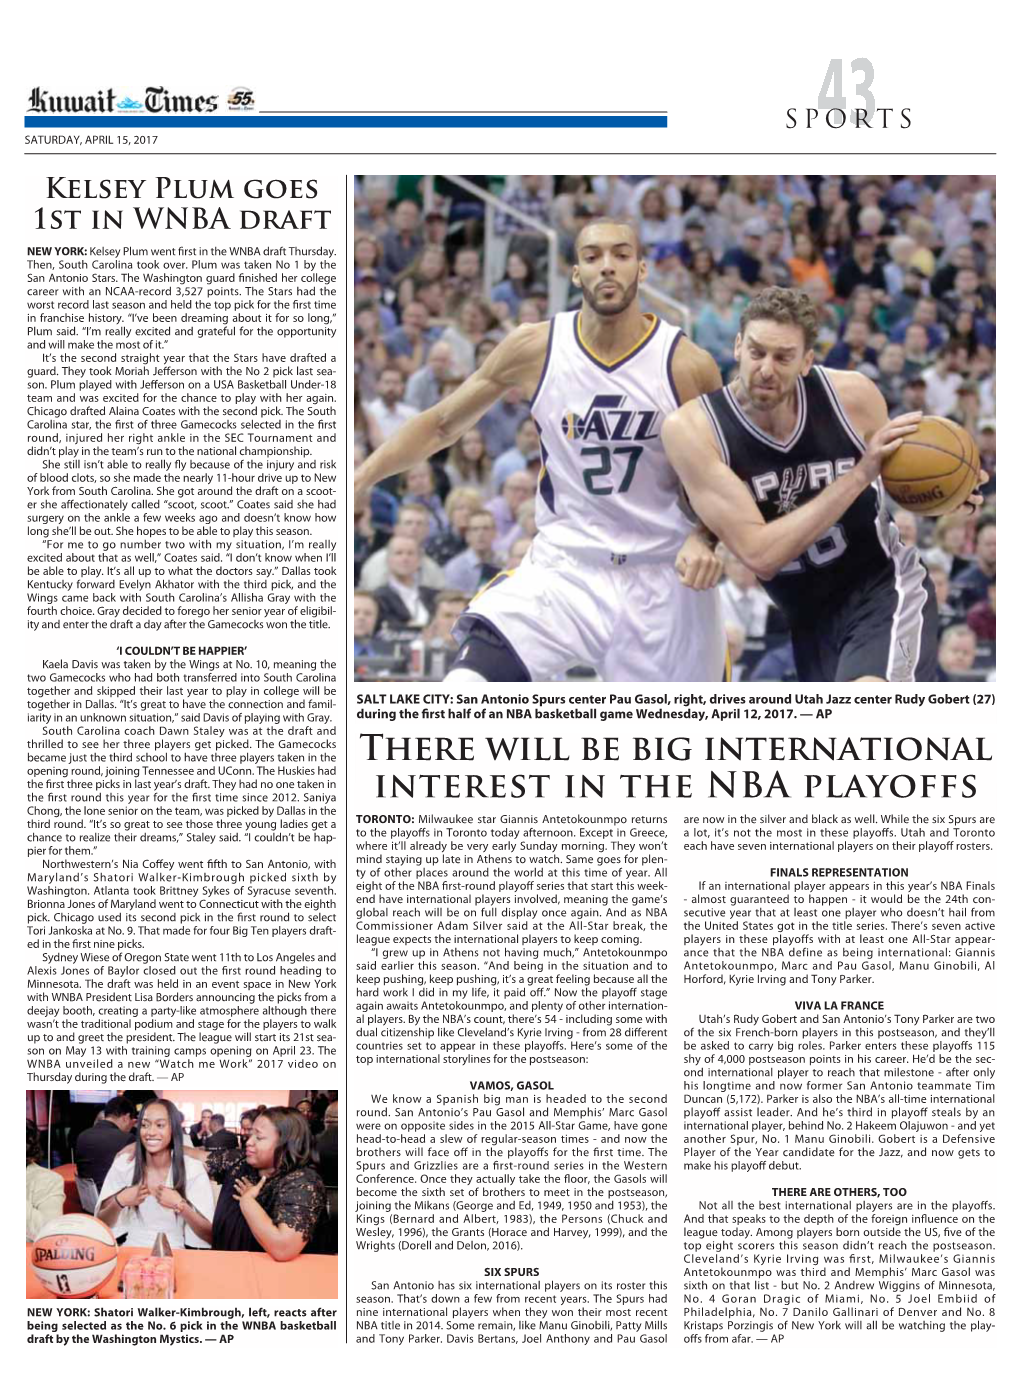 There Will Be Big International Interest in the NBA Playoffs